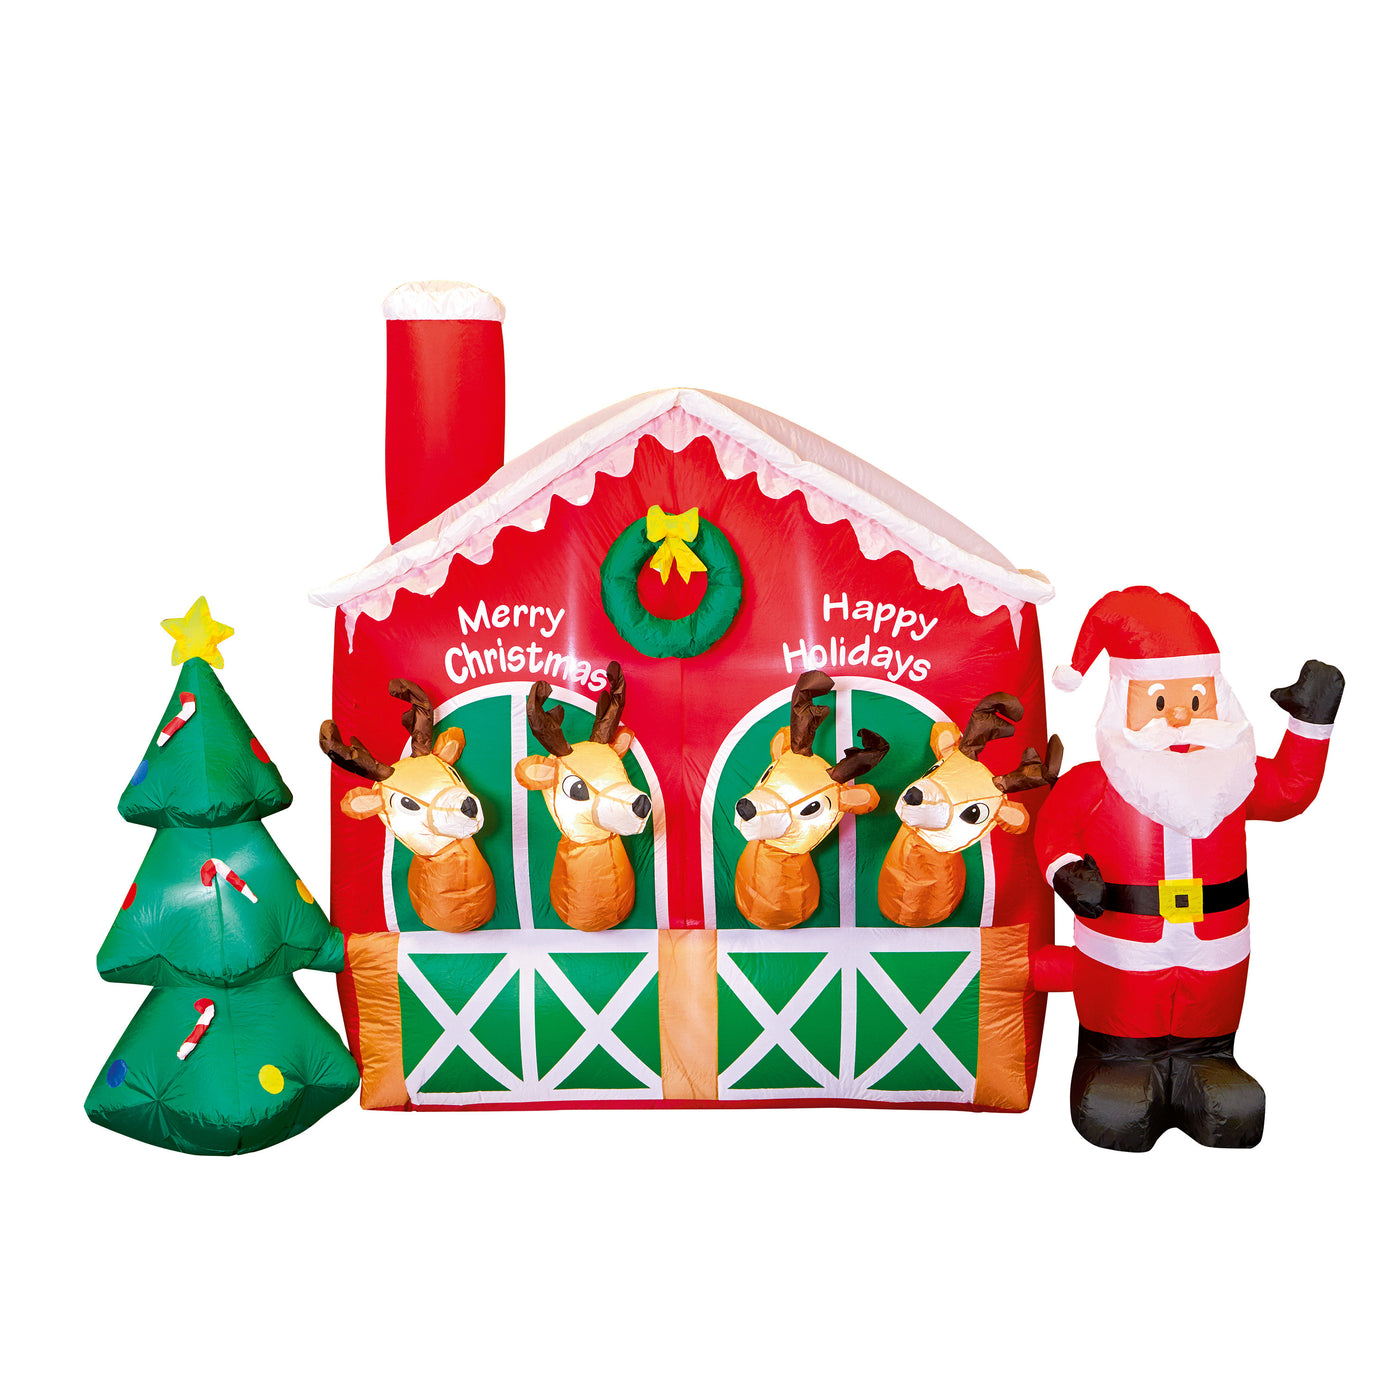 2.7 m Inflatable Stable with Reindeers, Santa, and Christmas Tree